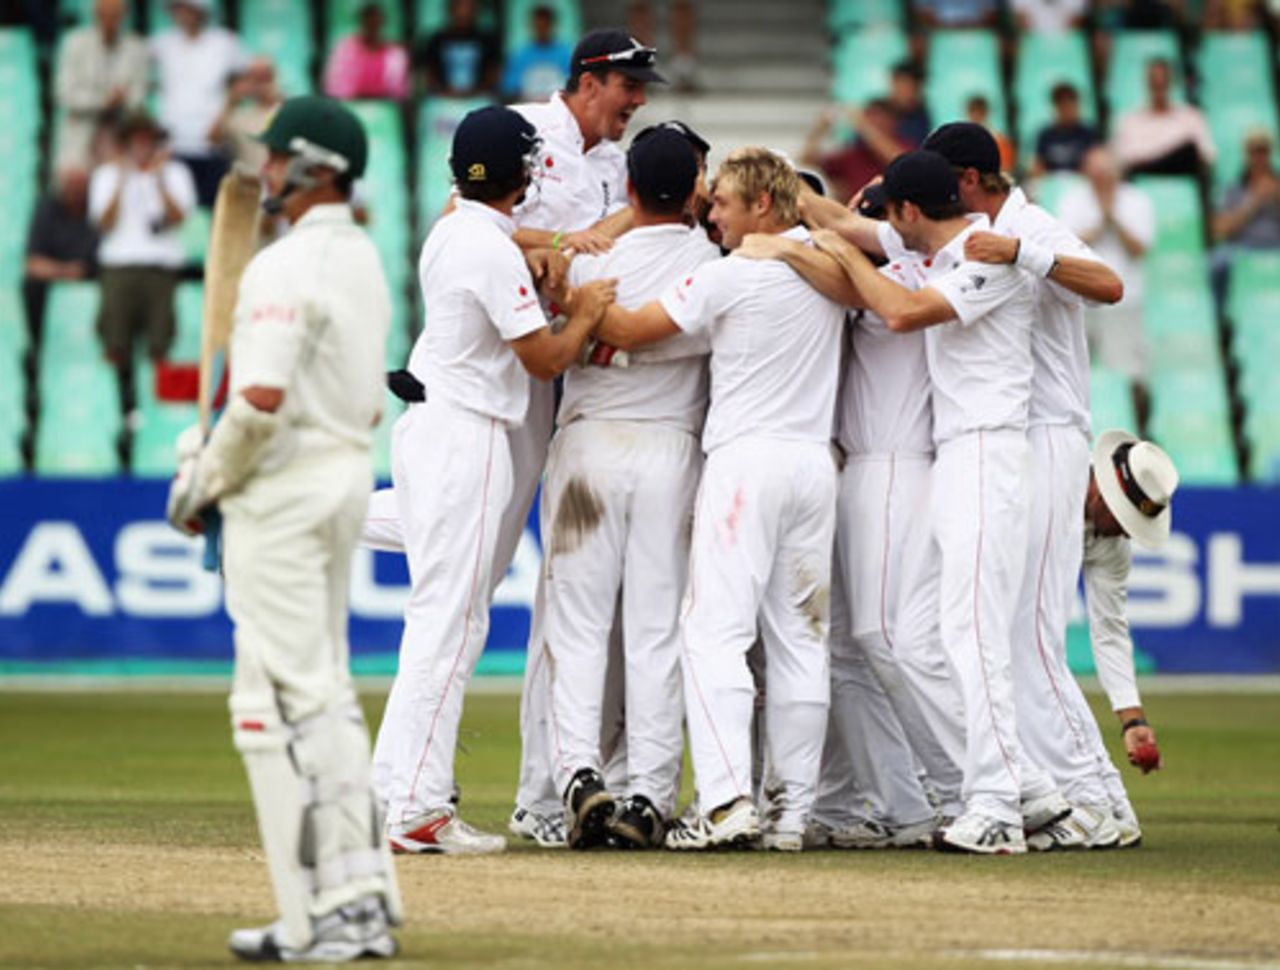 Graeme Swann took the final wicket to fall, as he did at the Oval to secure the 2009 Ashes, and was mobbed by his team-mates as Dale Steyn looks on, South Africa v England, 2nd Test, Durban, December 30, 2009 